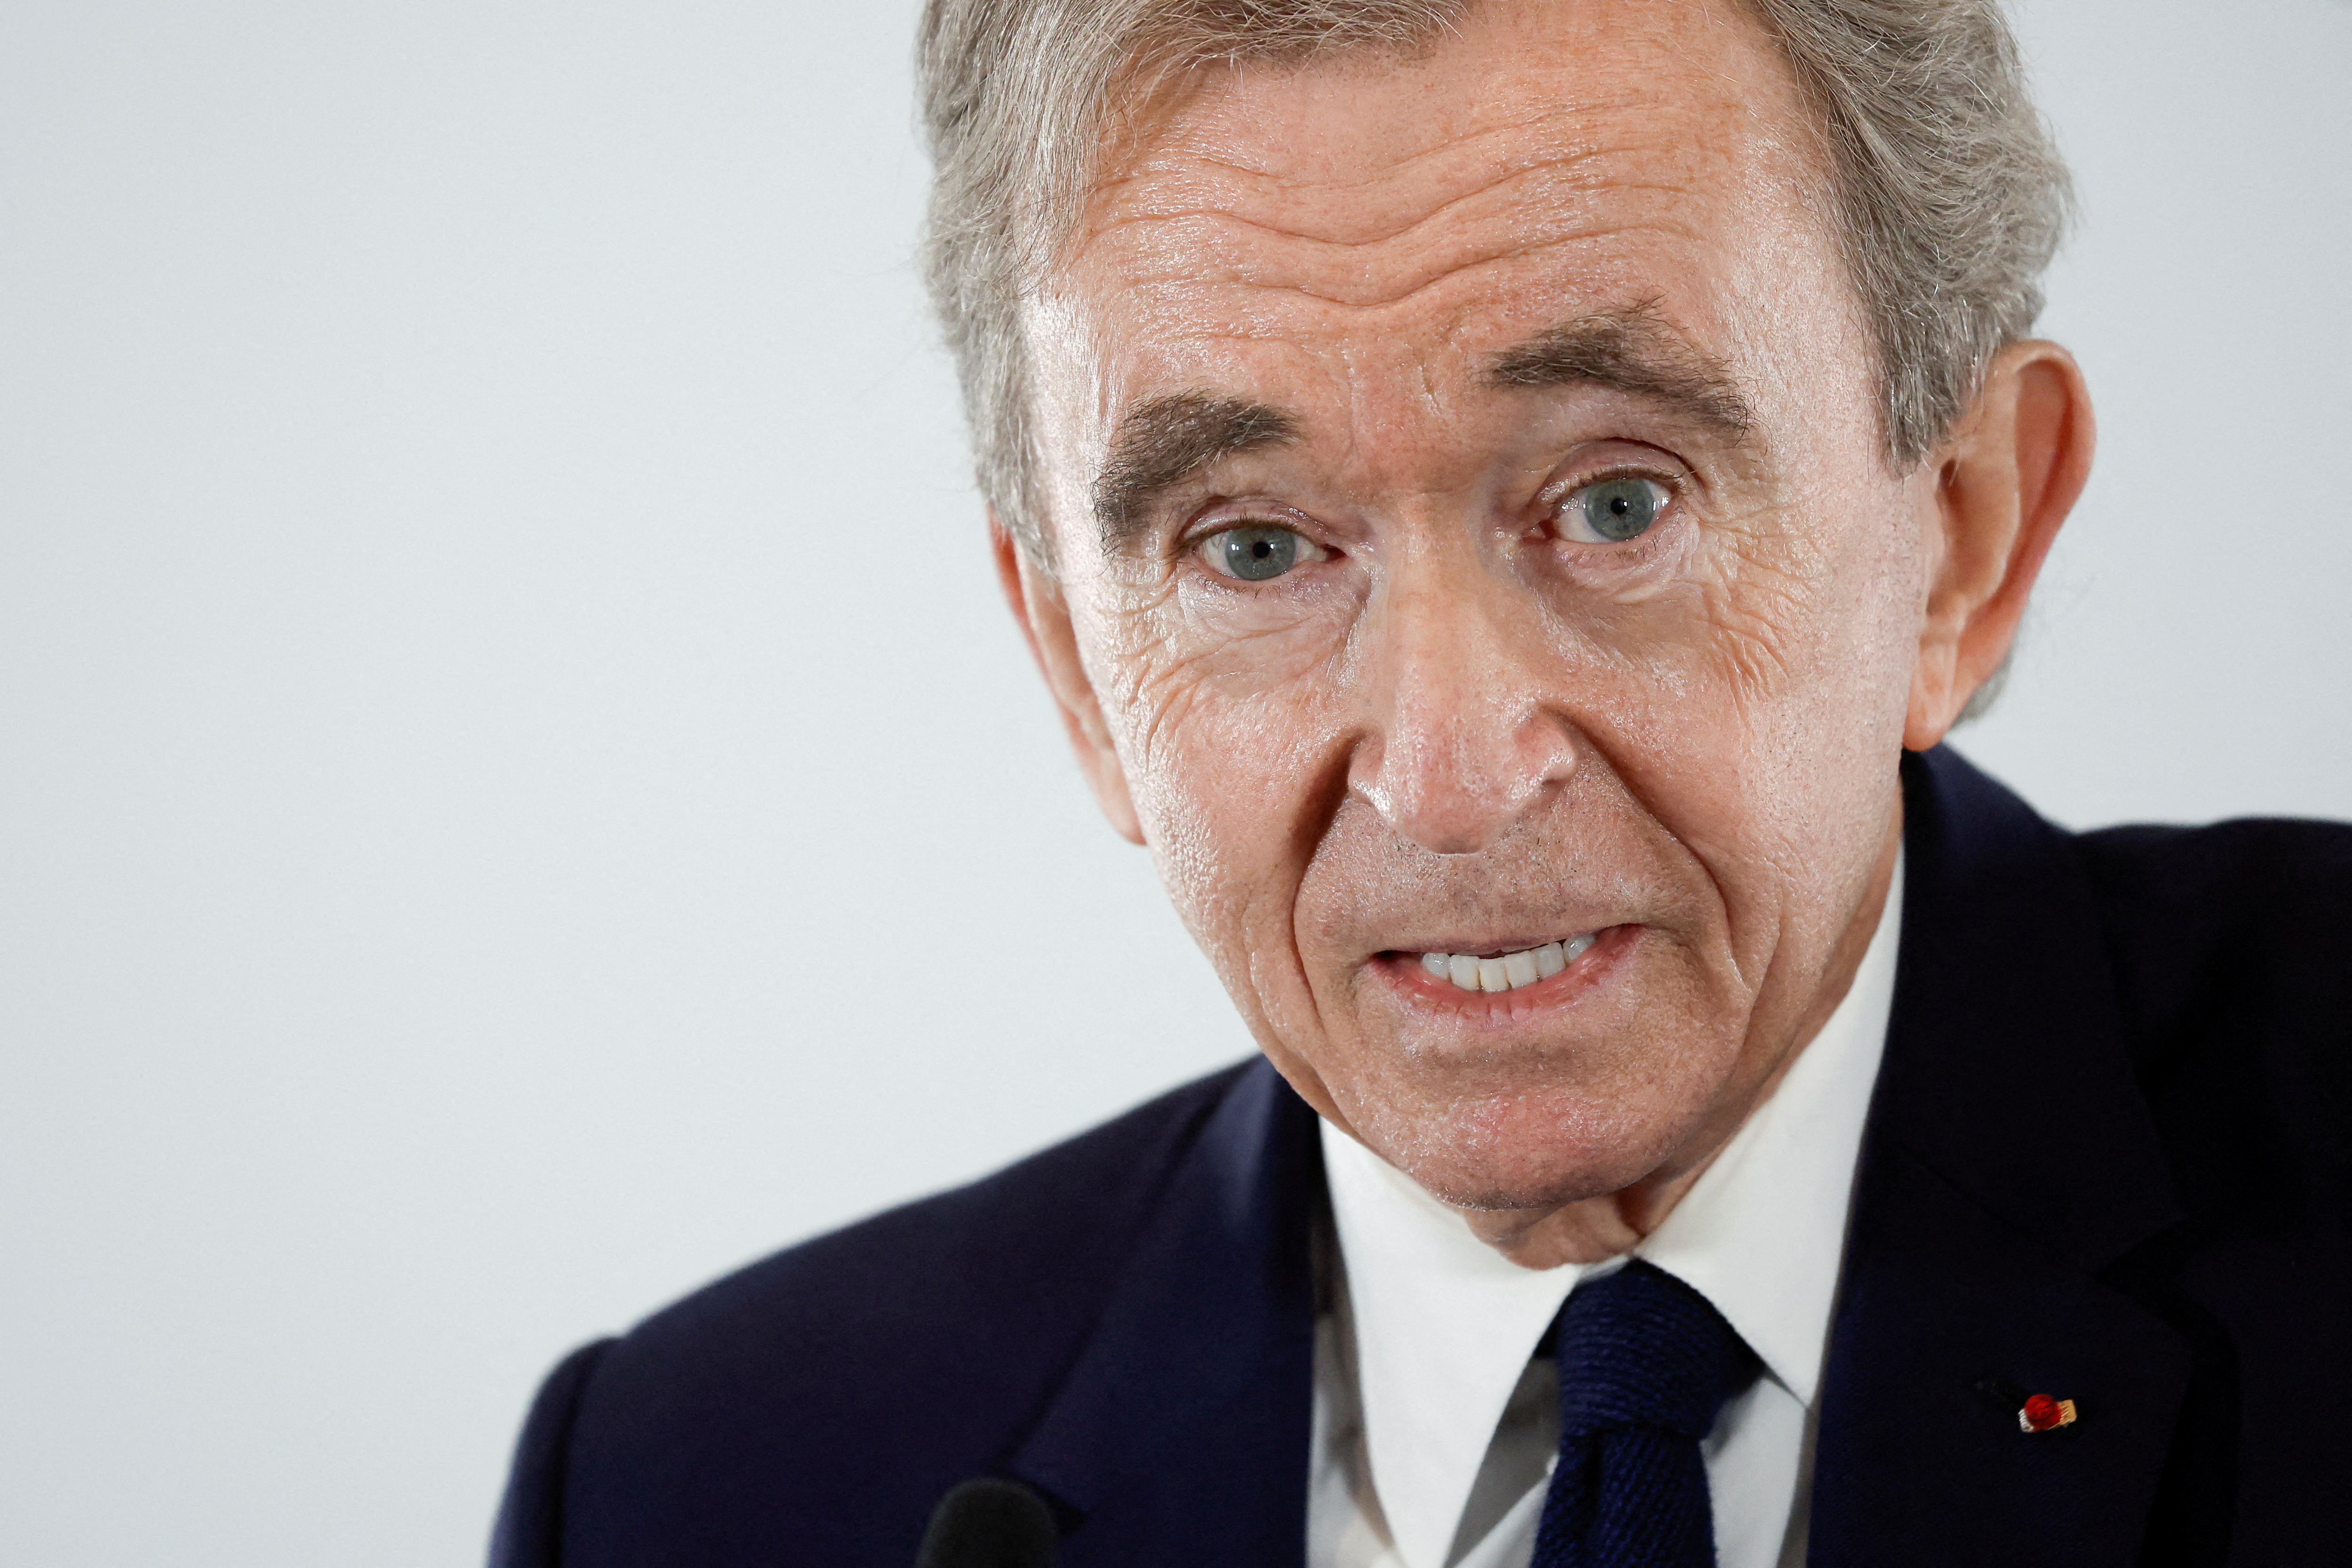 FILE PHOTO: Bernard Arnault, billionaire and chairman of LVMH Moet Hennessy Louis Vuitton SE, speaks at the inauguration of the Atelier Louis Vuitton in Vendome, France, February 22, 2022. REUTERS/Benoit Tessier/File Photo